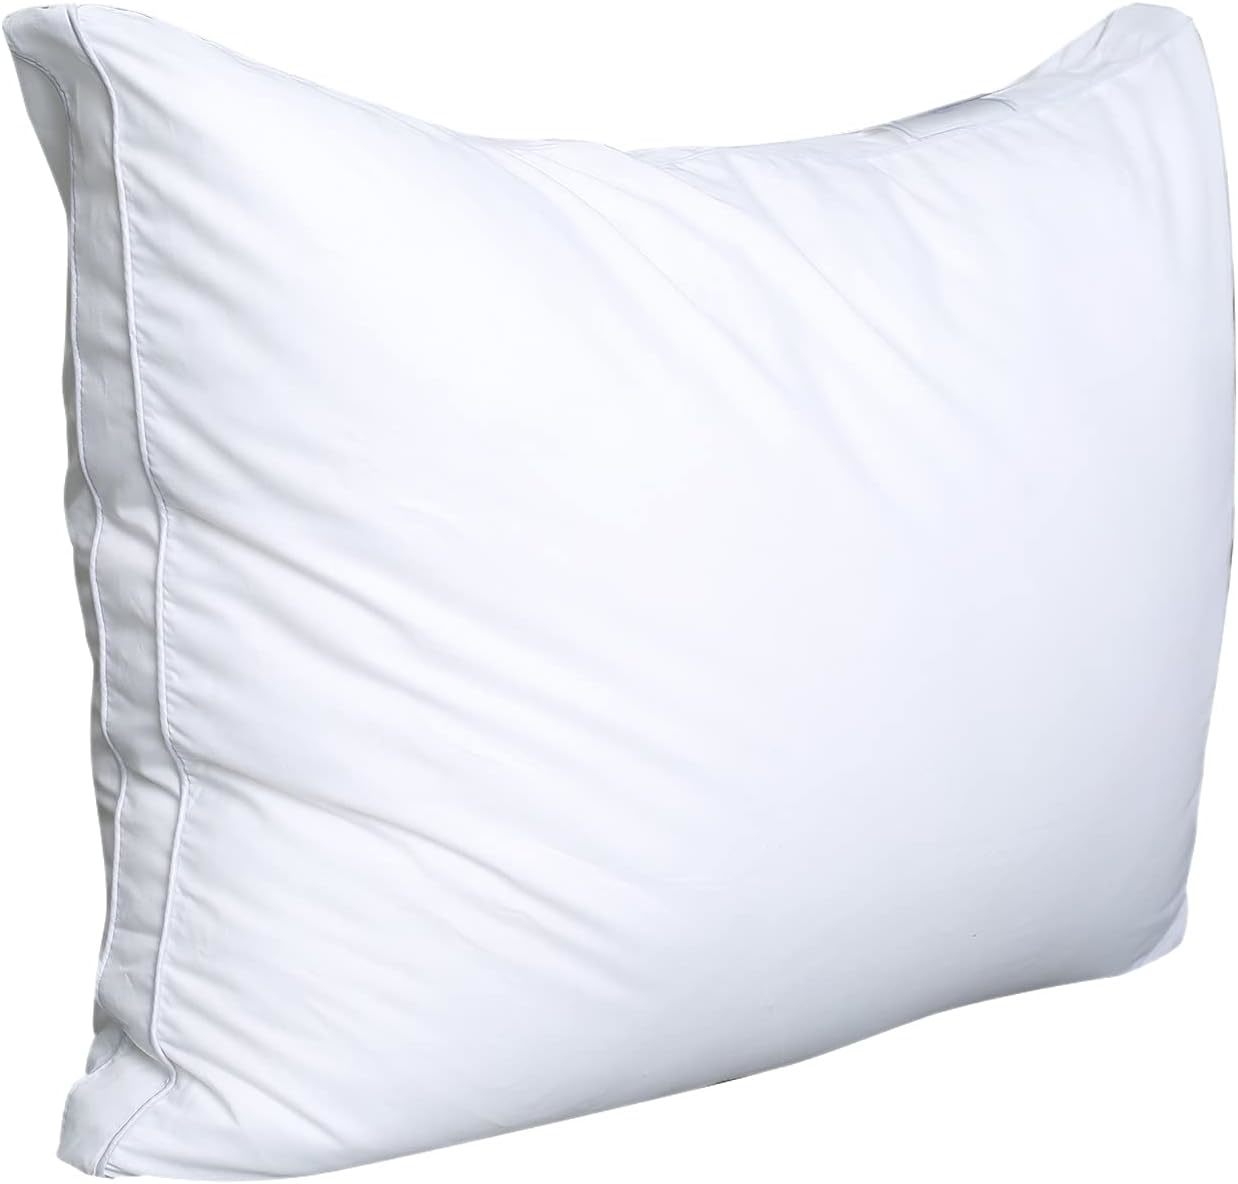 Bed Pillows for Sleeping 1 Pack Standard Size Luxury Hotel Collection Pillow Sof - $38.95